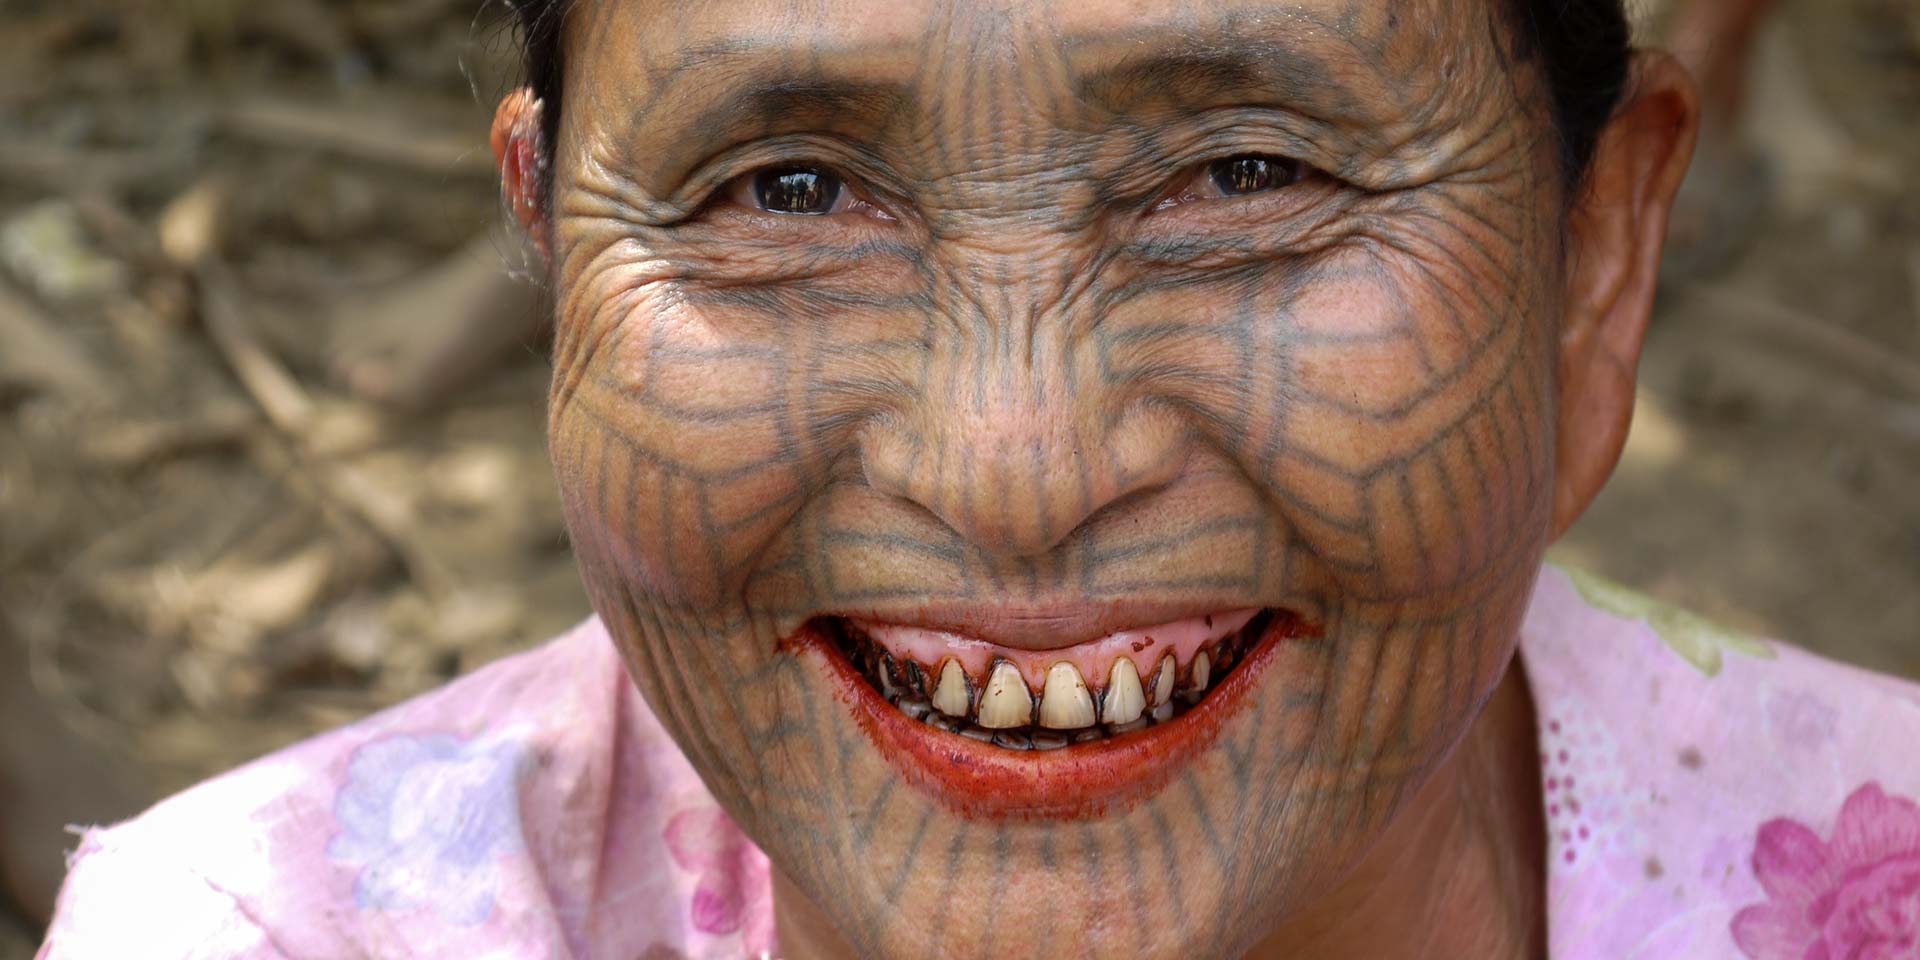 CLOTHING Tribal Face Tattoo  Art  Animations  Episode Forums